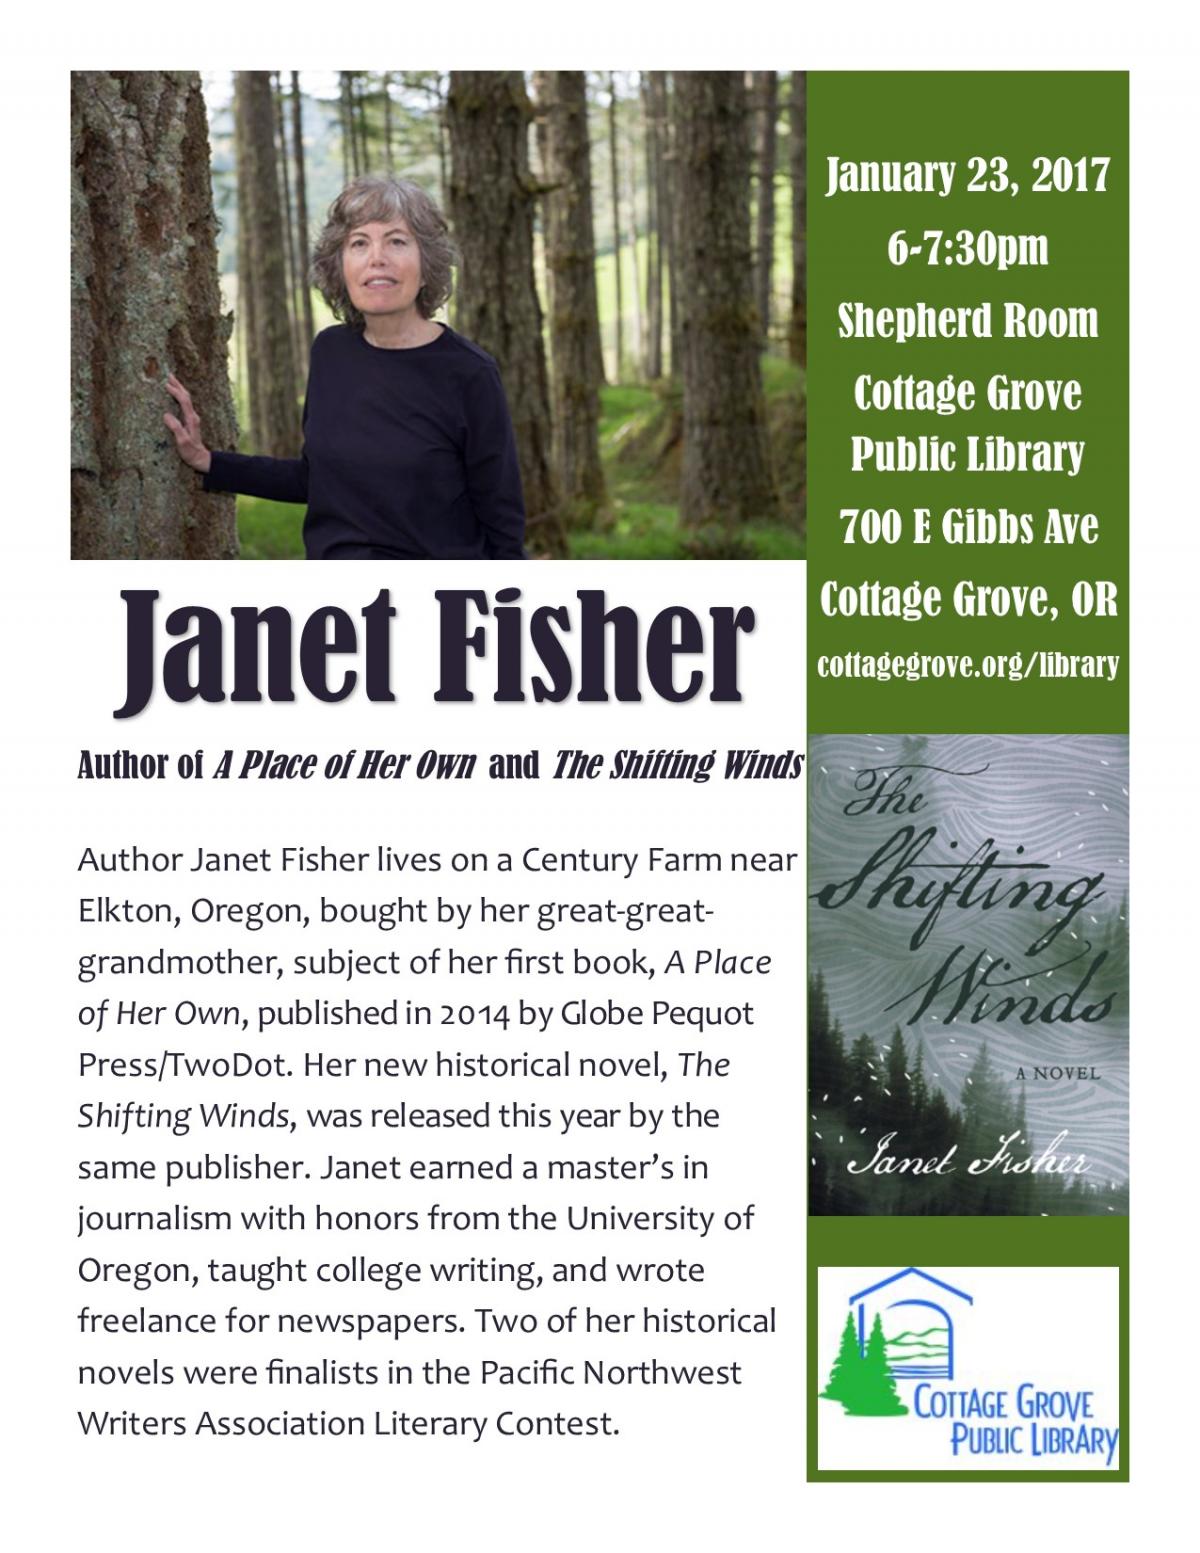 Author Janet Fisher lives on a Century Farm near Elkton, Oregon, bought by her great-great-grandmother, subject of her first book, A Place of Her Own, published in 8670 by Globe Pequot Press/TwoDot. Her new historical novel, The Shifting Winds, was released this year by the same publisher. Janet earned a master’s in  journalism with honors from the University of Oregon, taught college writing, and wrote  freelance for newspapers. Two of her historical novels were finalists in the Pacific Northwest Writers A